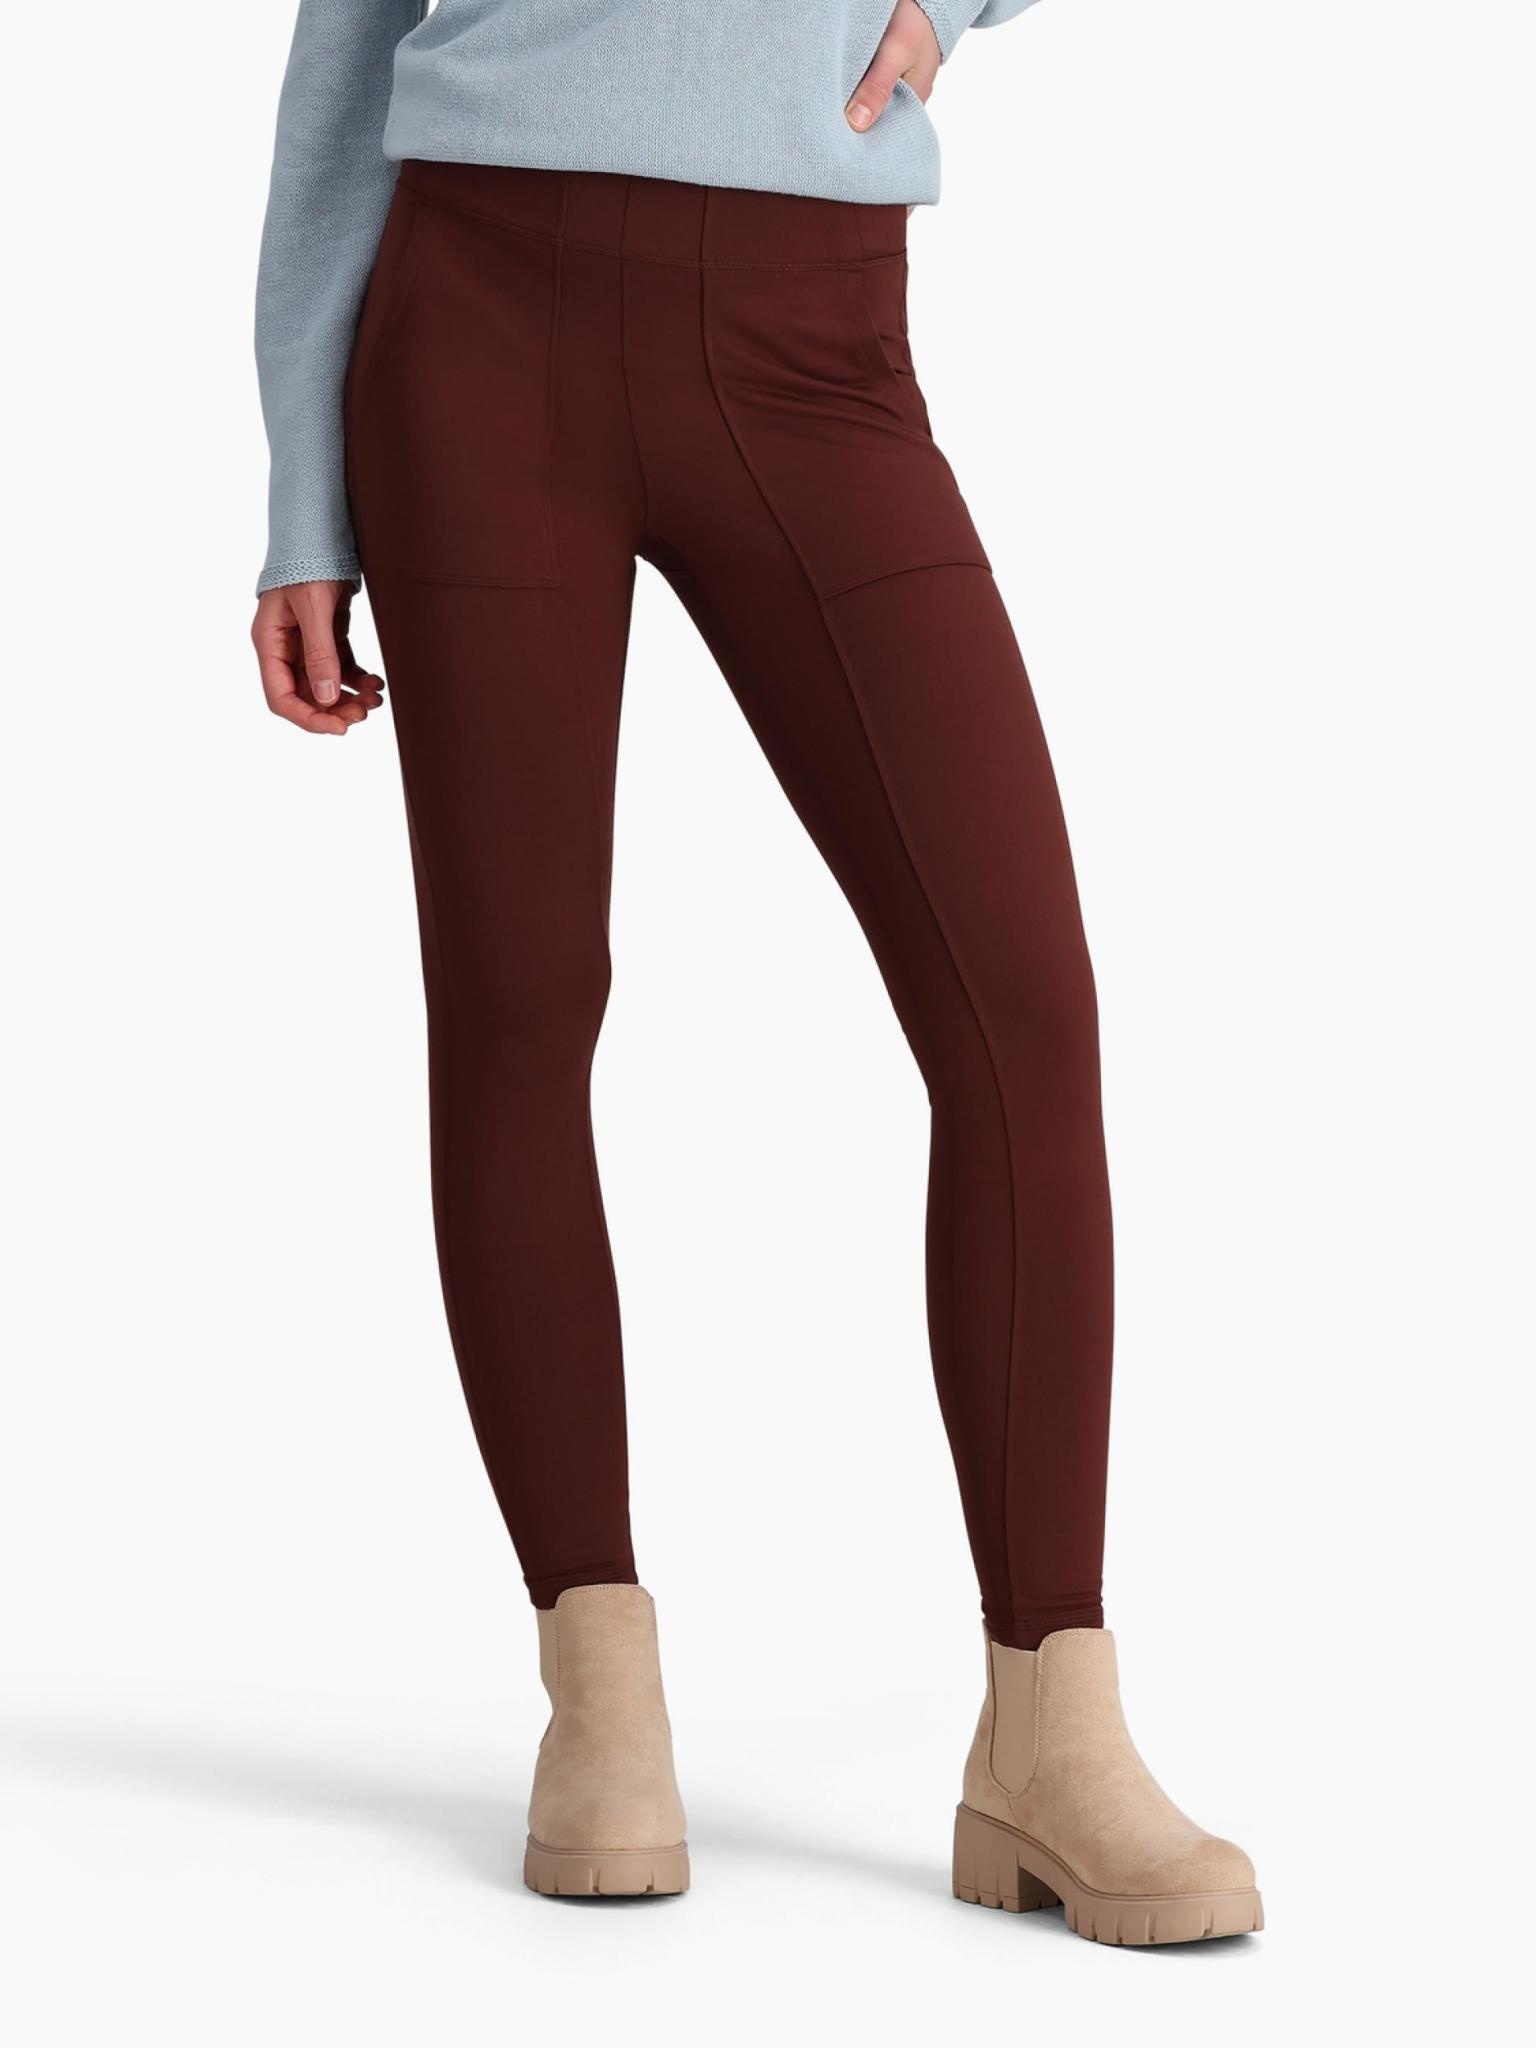 Women's Backcountry Pro Winter Legging - Chatham Outfitters